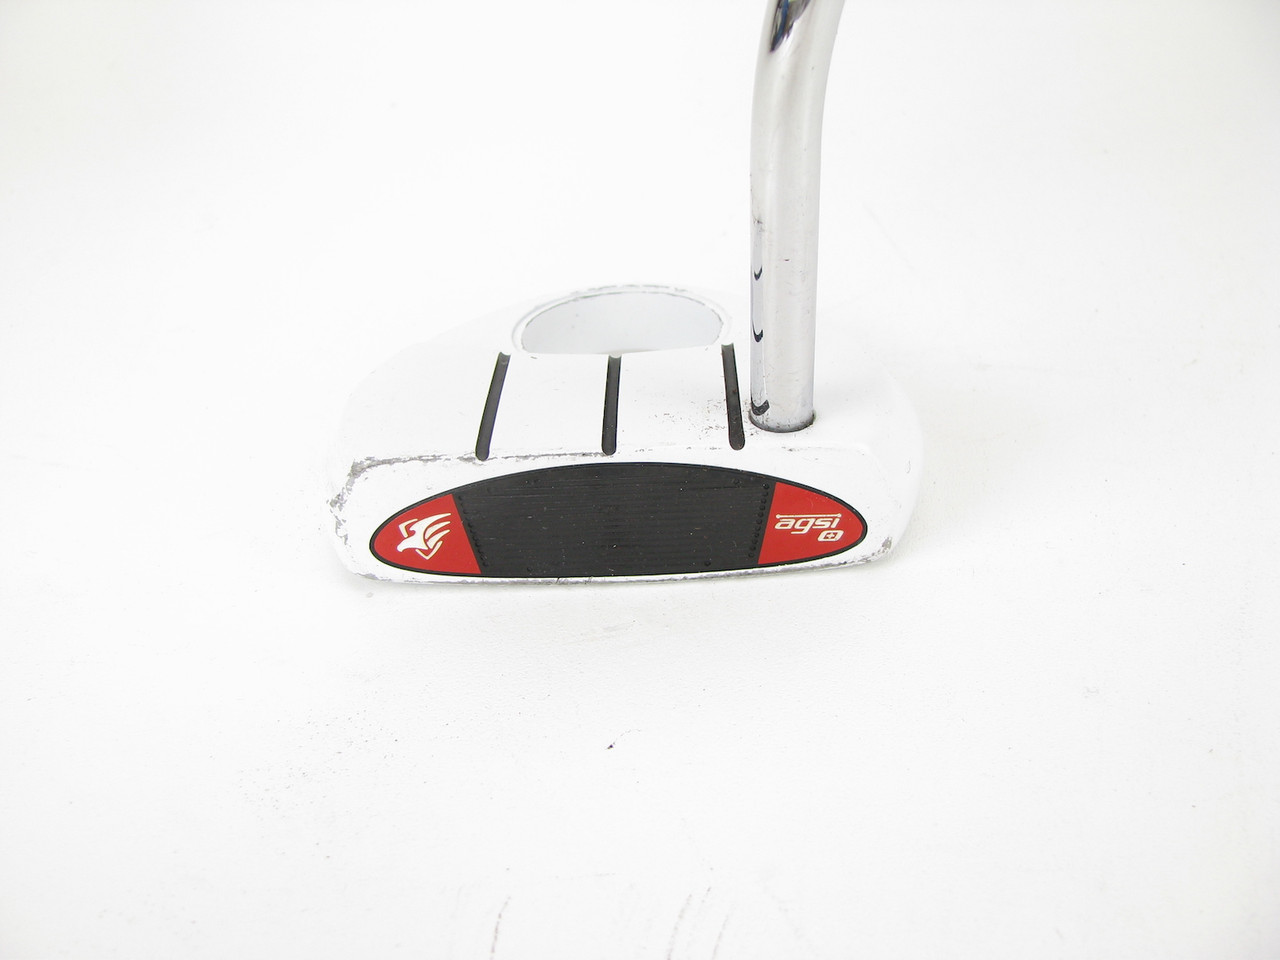 TaylorMade Rossa Corza Ghost Putter 33.5 inches